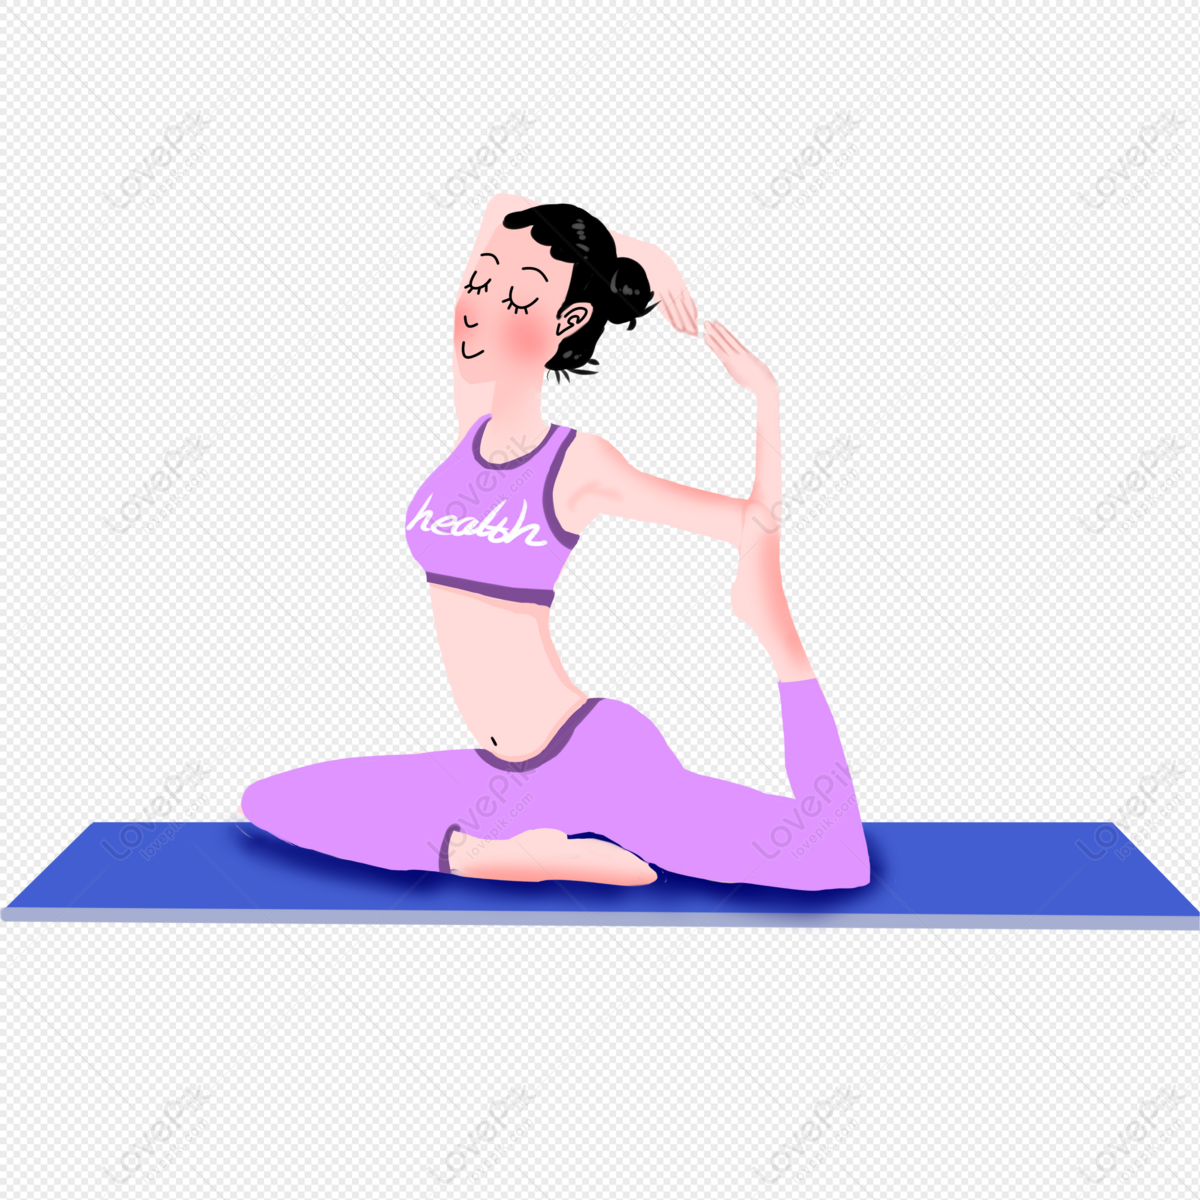 lovepik girl in purple dress practicing yoga png image 401296623 wh1200